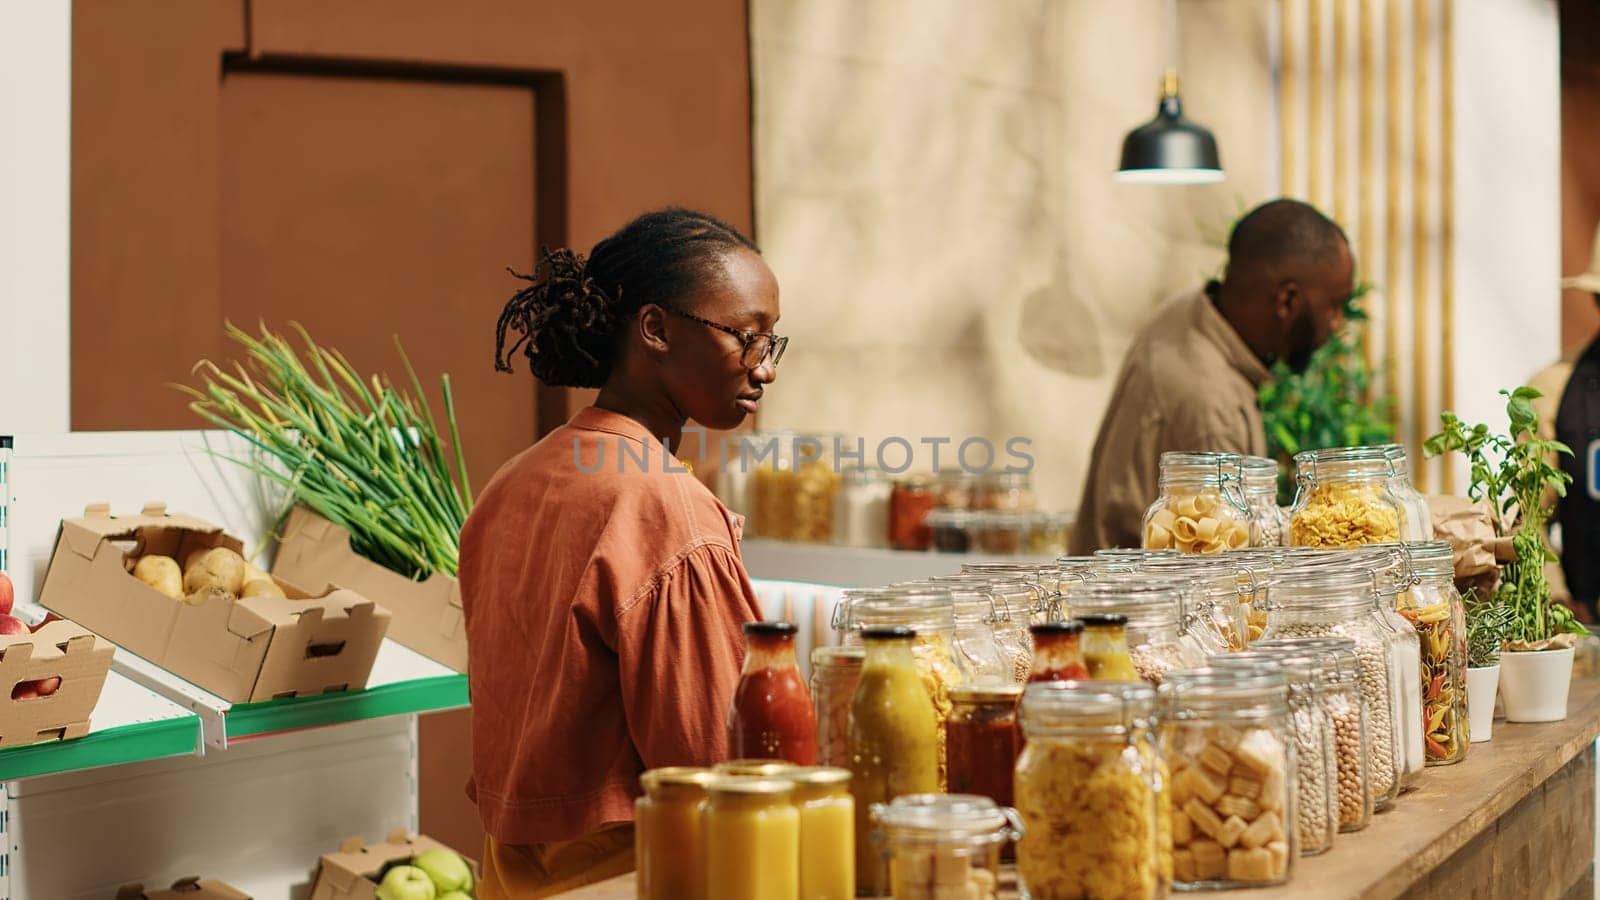 African american client examines bio homemade bulk products, looking to buy natural ethically sourced food alternatives for healthy nutrition. Woman shopping for goods at zero waste store. Camera 1.